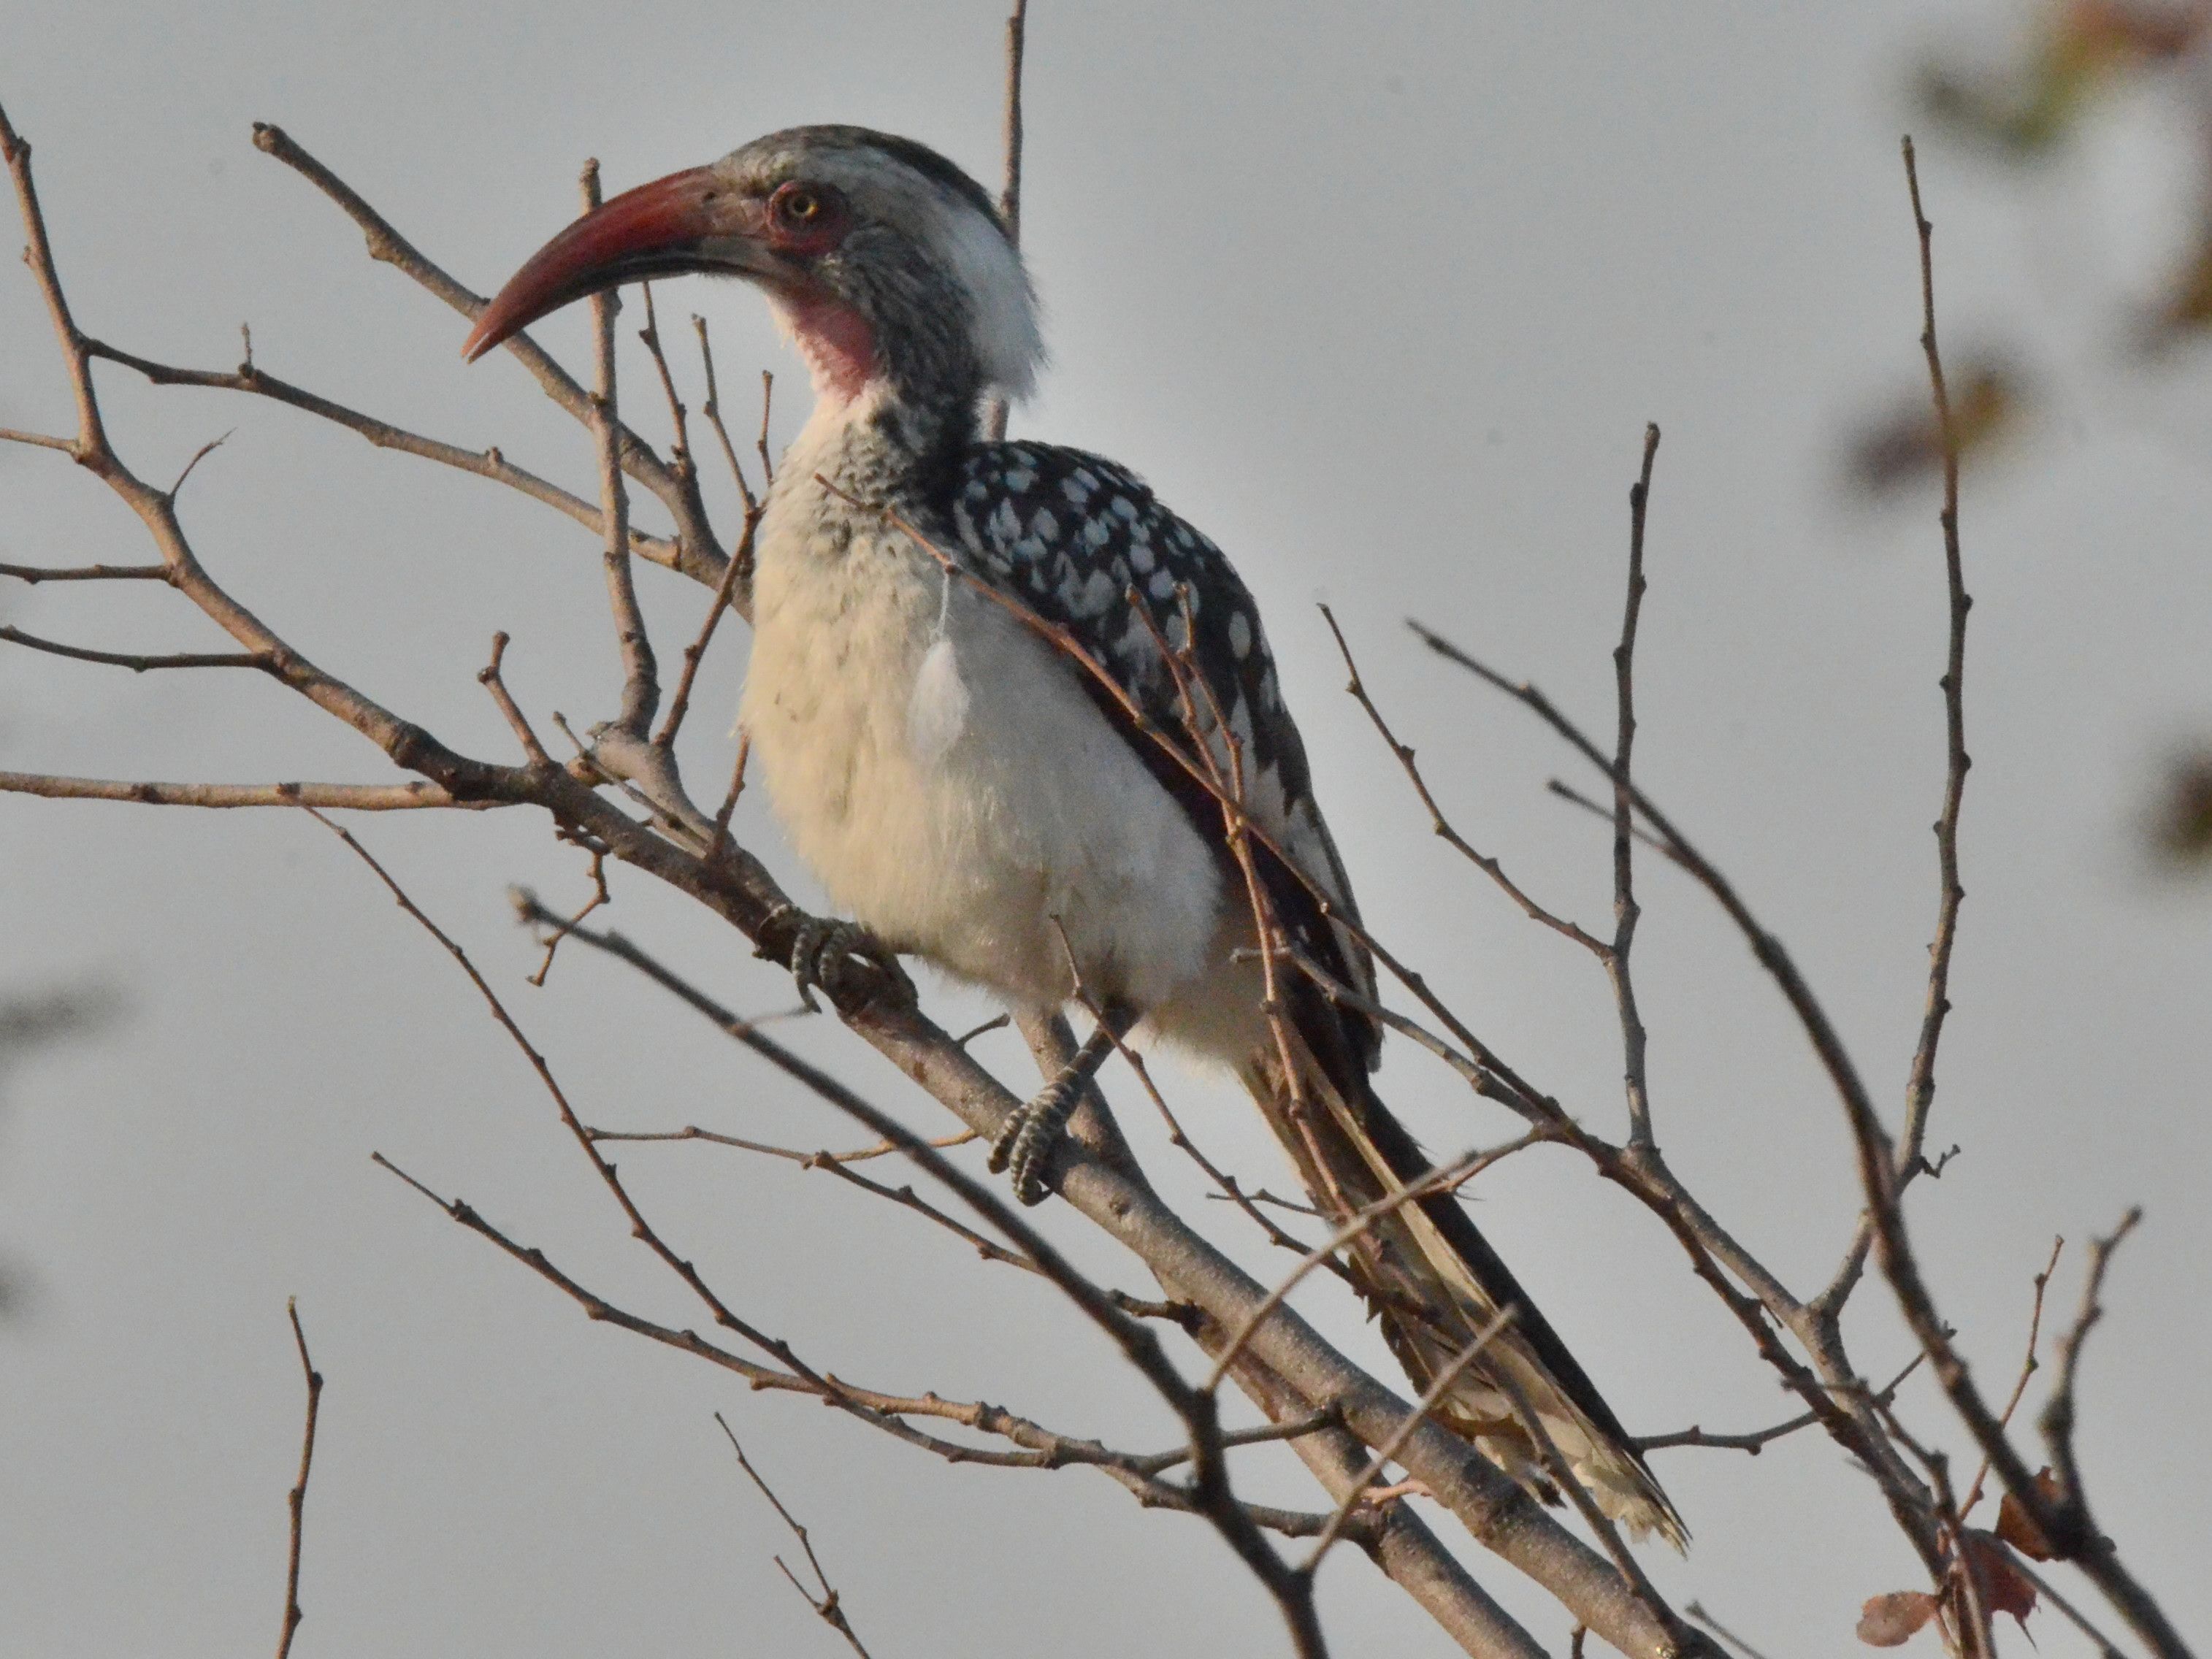 Click picture to see more Red-billed Hornbills.